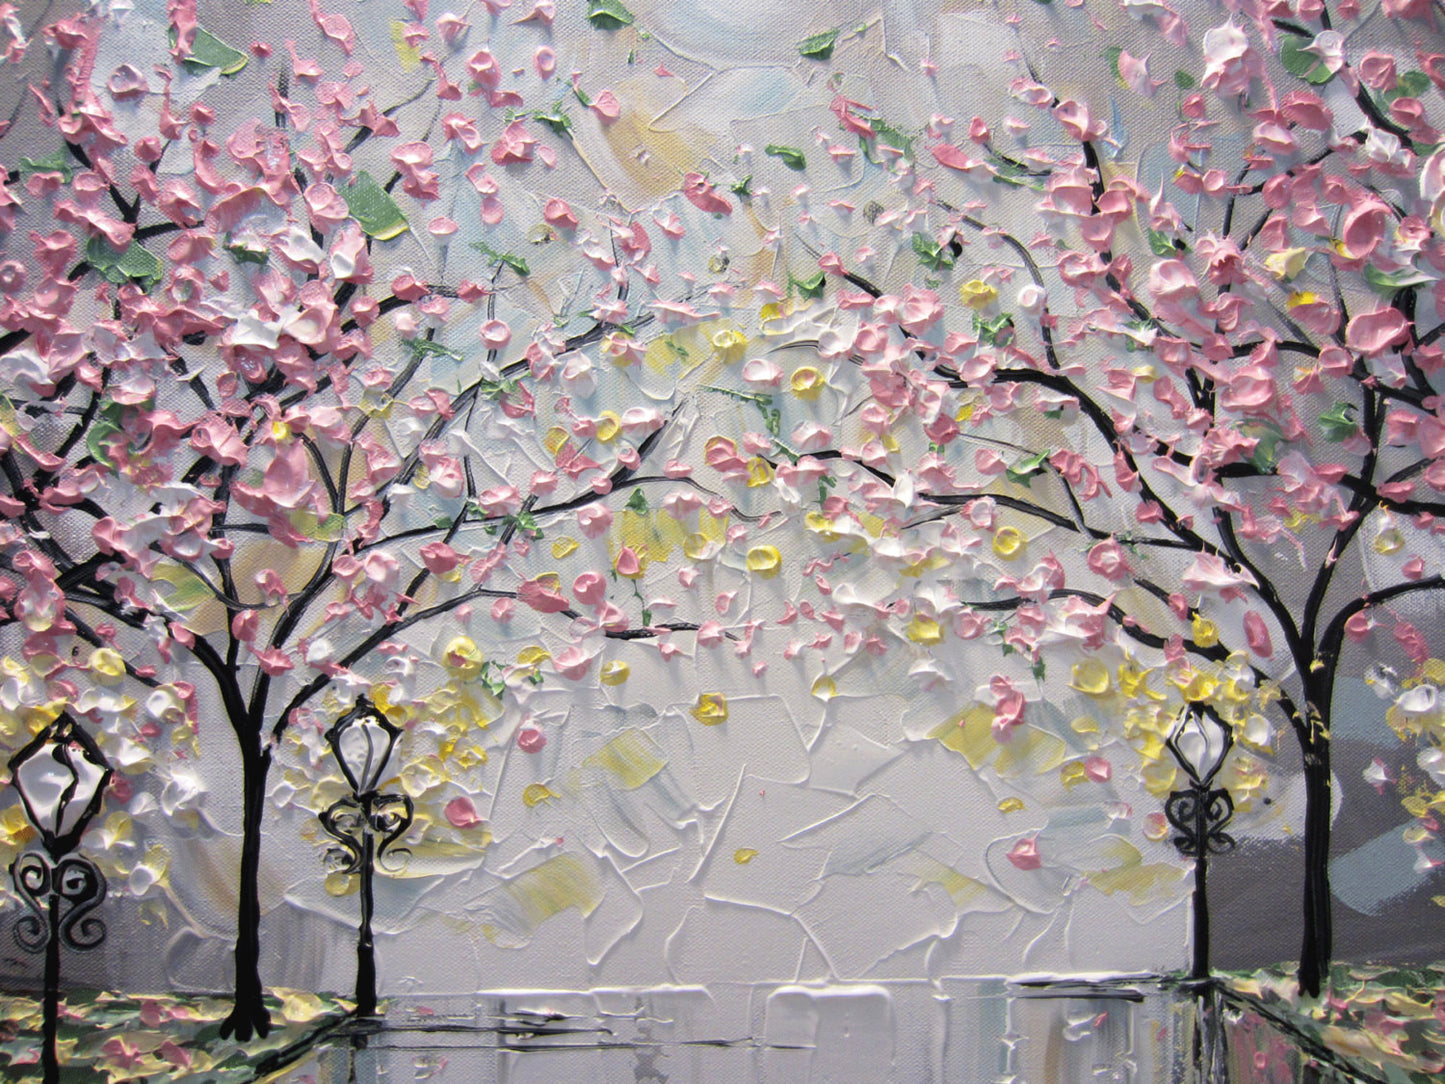 SOLD Original Art Abstract Painting Pink White Cherry Tree Blossoms Park Textured Wall Decor Palette Knife Grey Yellow - Christine - Christine Krainock Art - Contemporary Art by Christine - 4